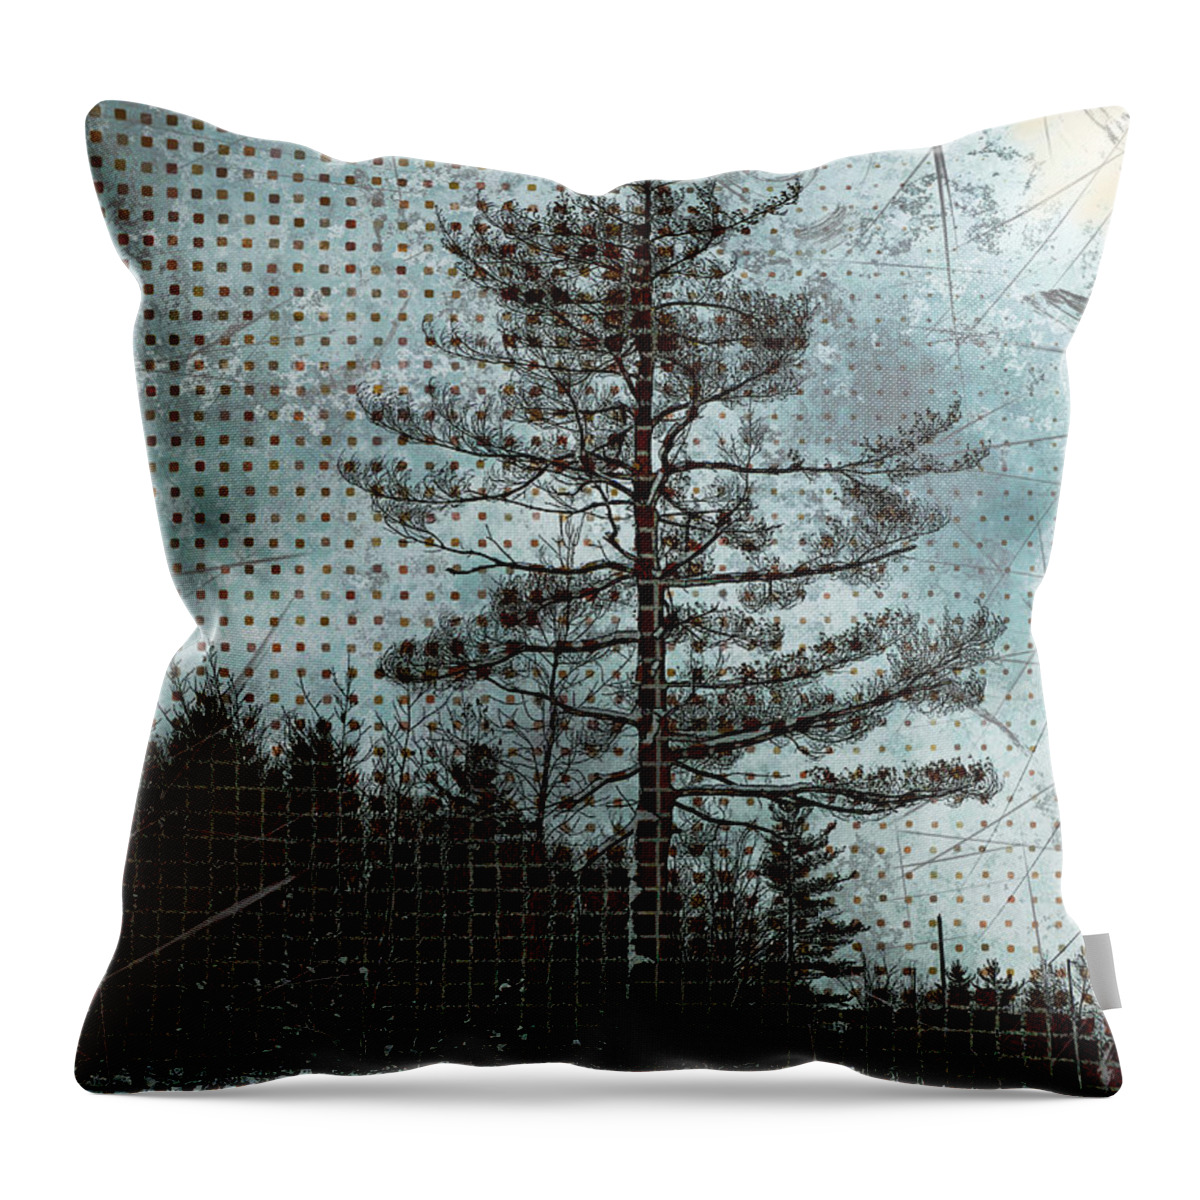 Pine Throw Pillow featuring the digital art The Old Pine by Claire Bull